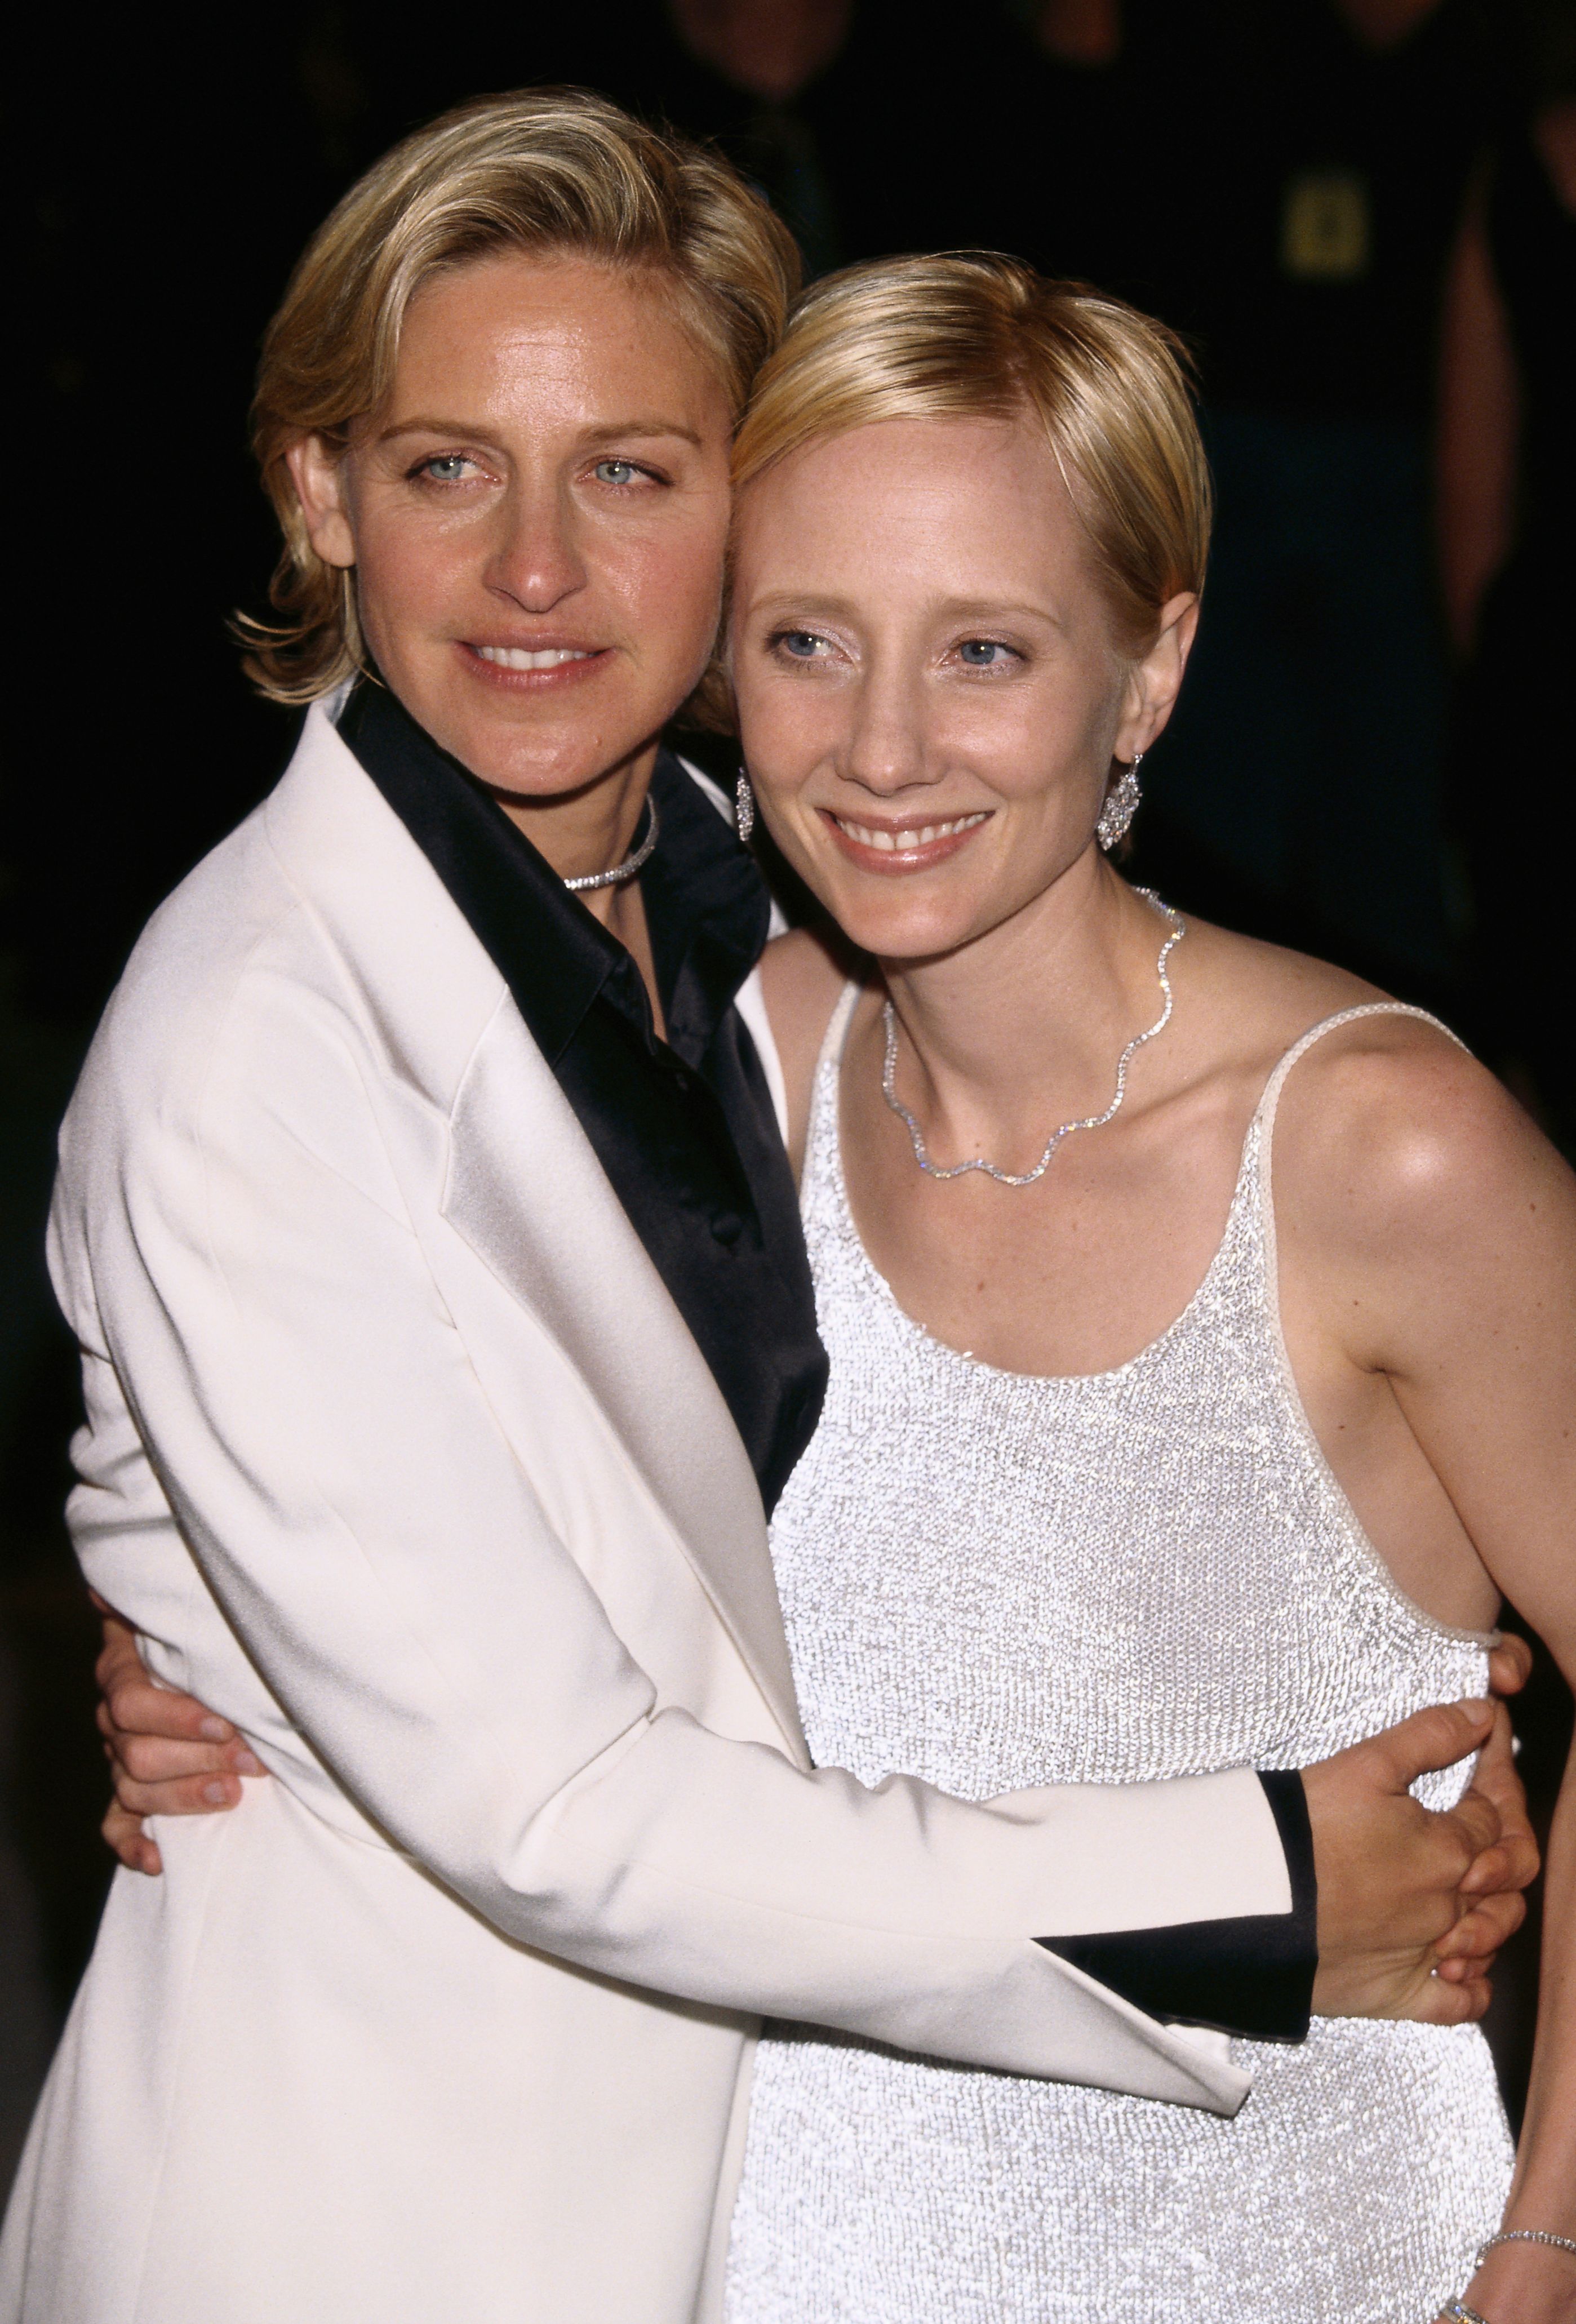 Anne Heche and Ellen DeGeneres at the 71st Annual Academy Awards on March 21,1999, in Los Angeles, California. | Source: Getty Images